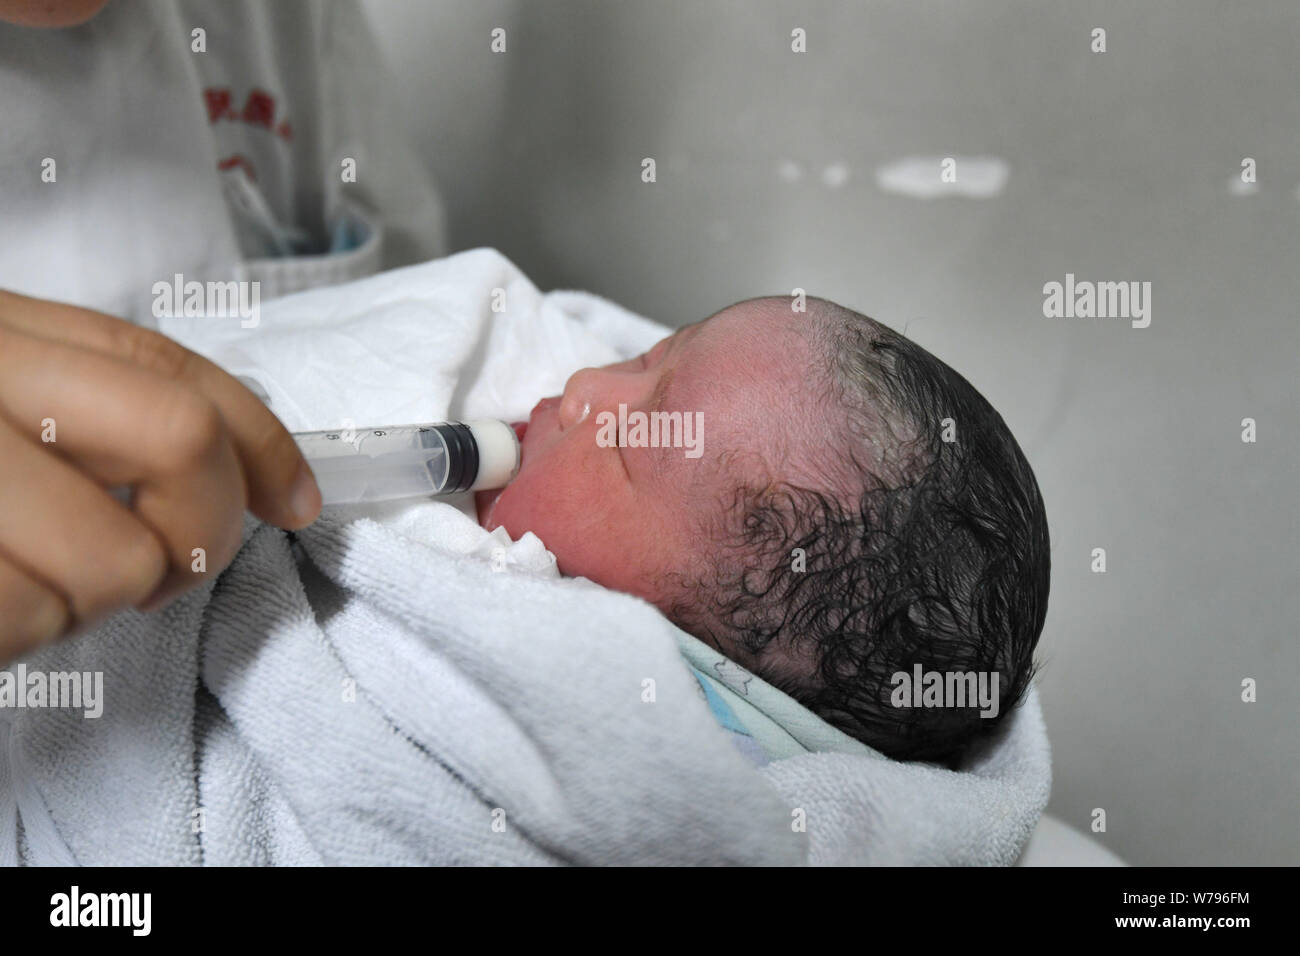 The healthy girl baby born by Chinese woman Wei Chunlan via Caesarean section who is just a little over three feet tall with dwarfism is pictured at a Stock Photo